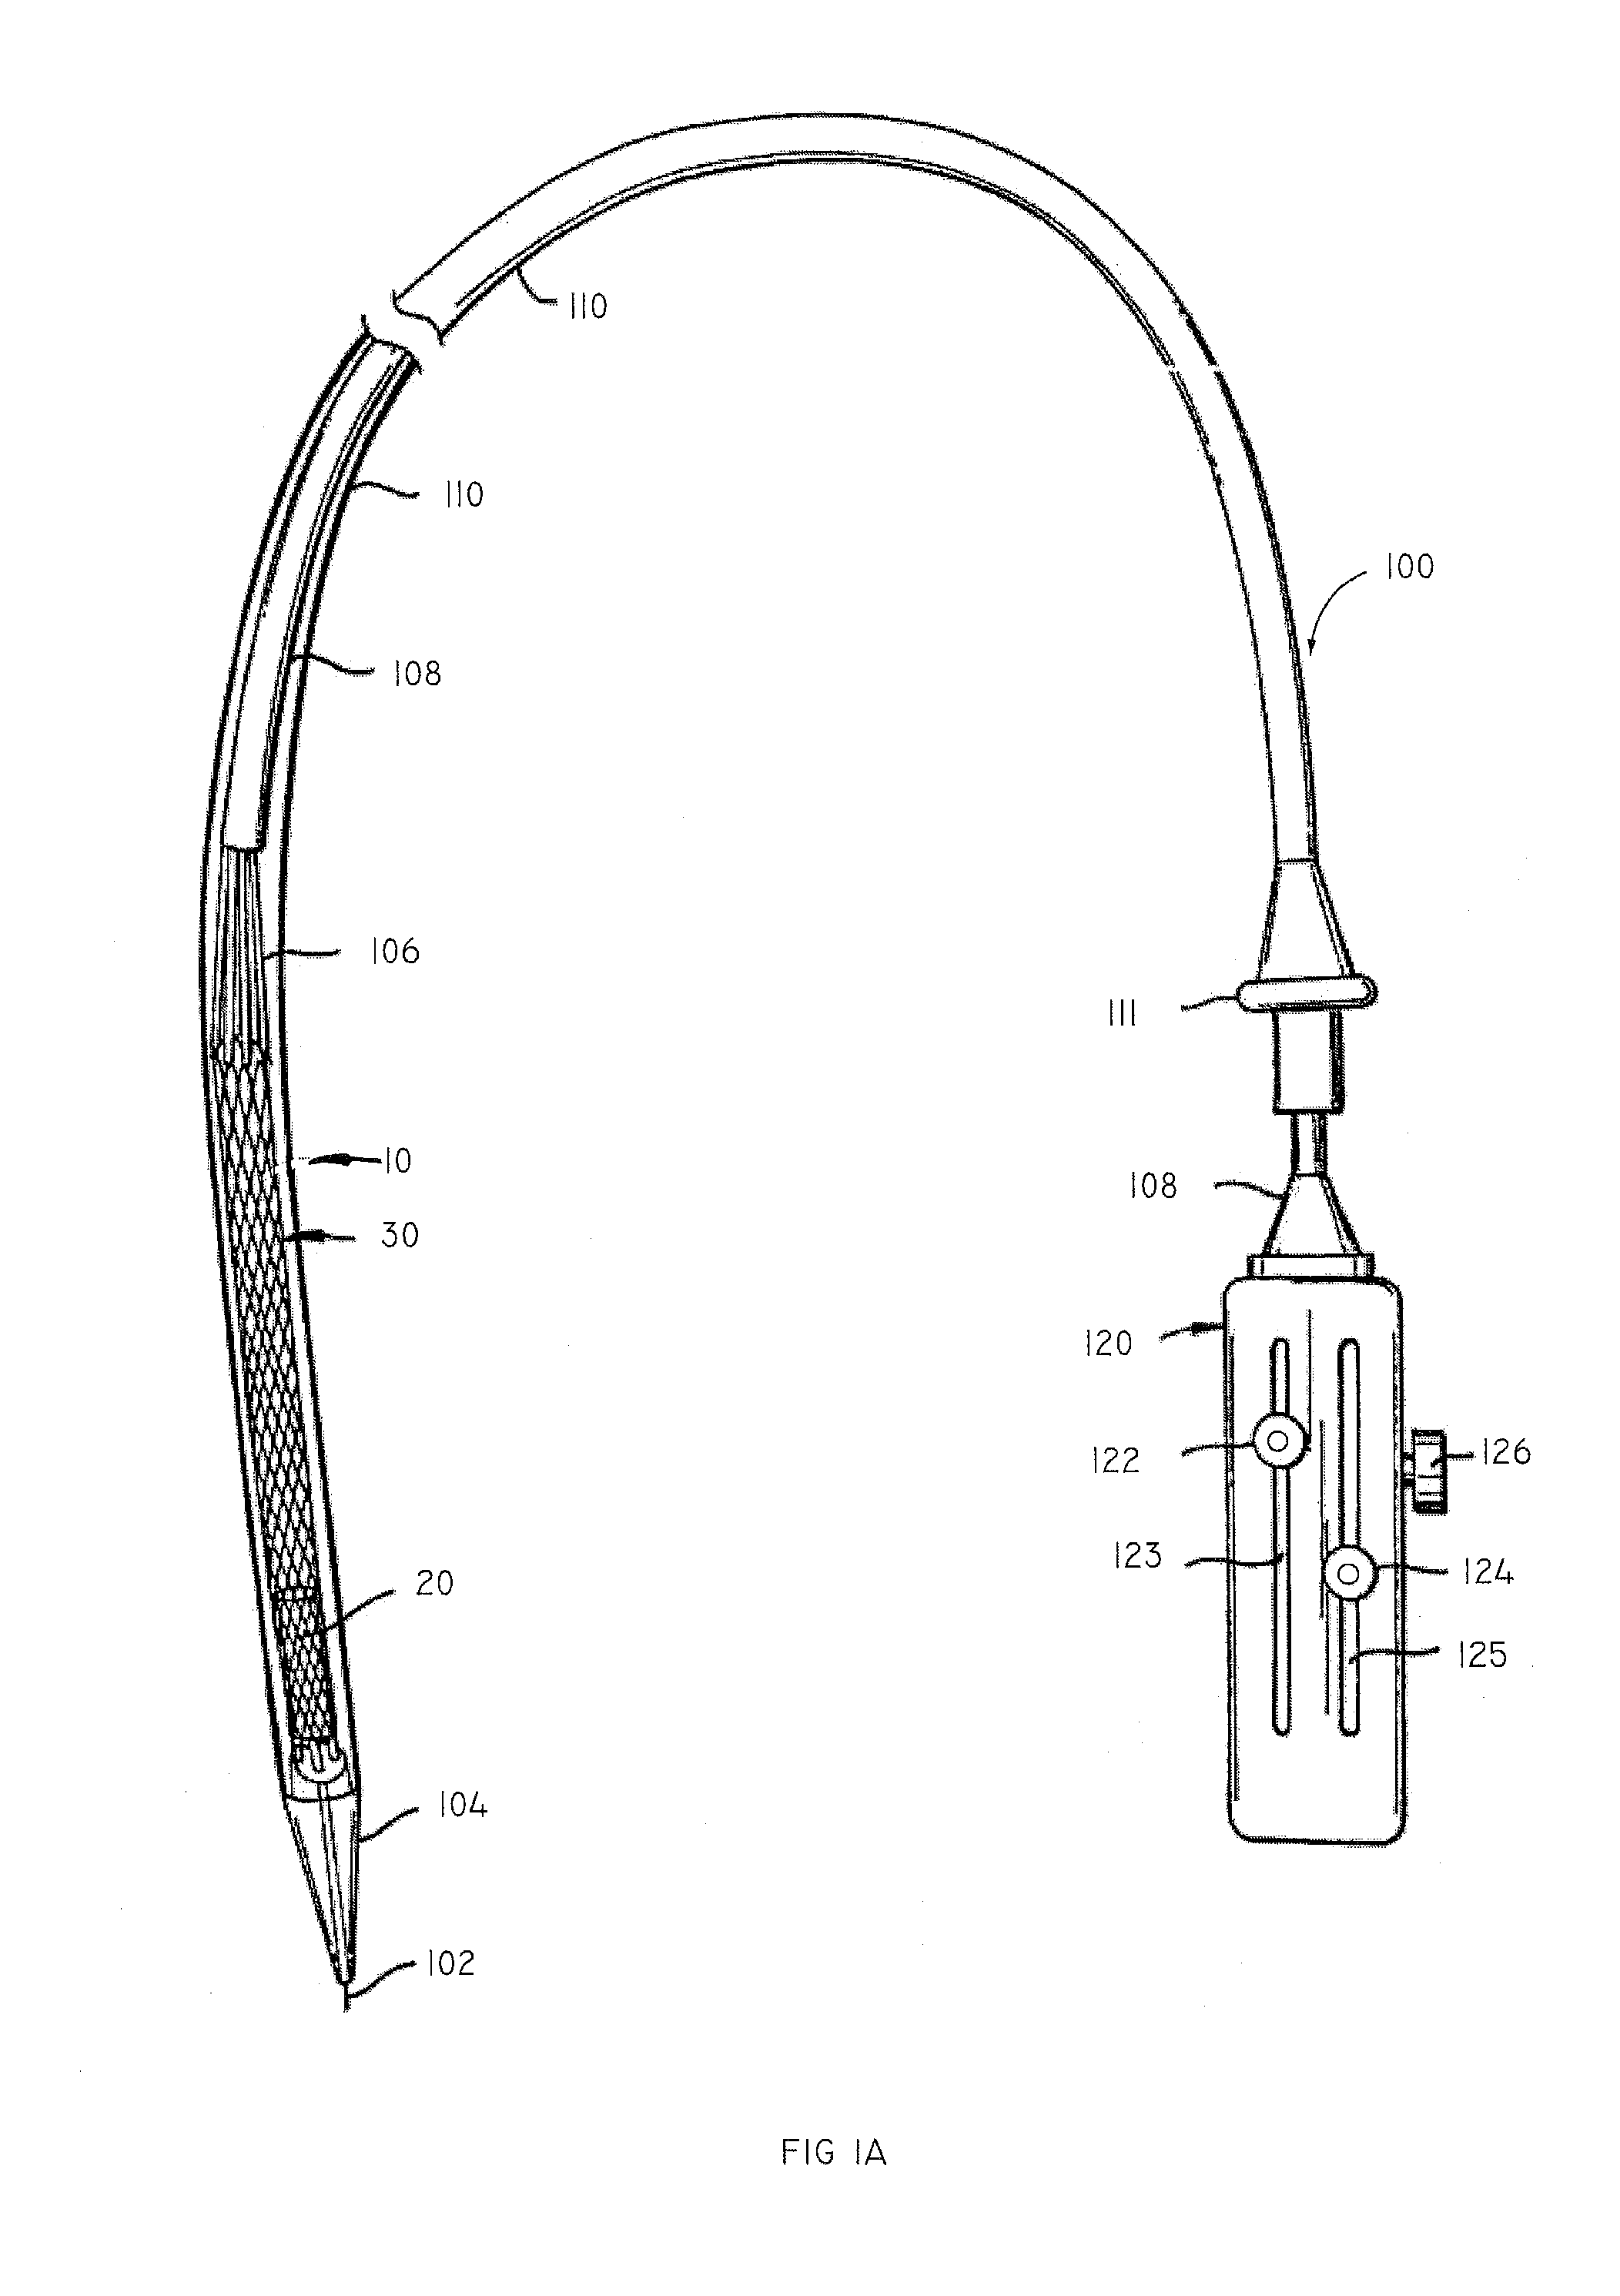 Methods and Apparatus for Endovascular Heart Valve Replacement Comprising Tissue Grasping Elements